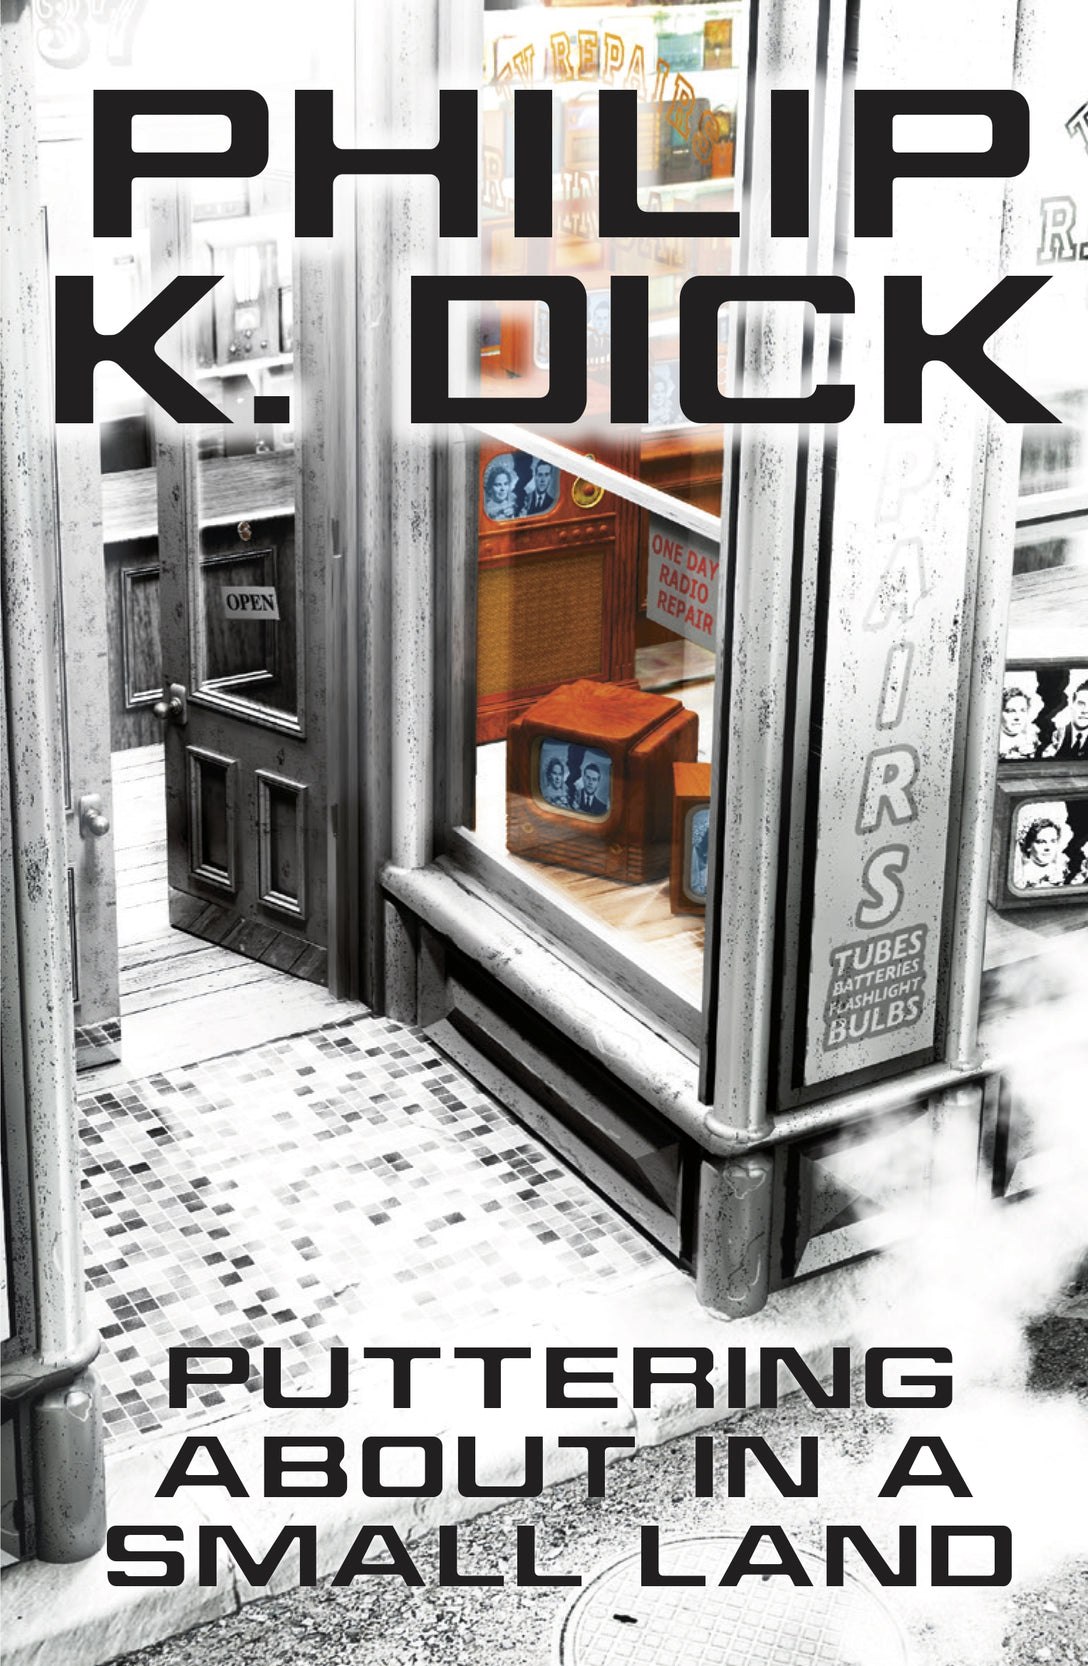 Puttering About in a Small Land by Philip K Dick